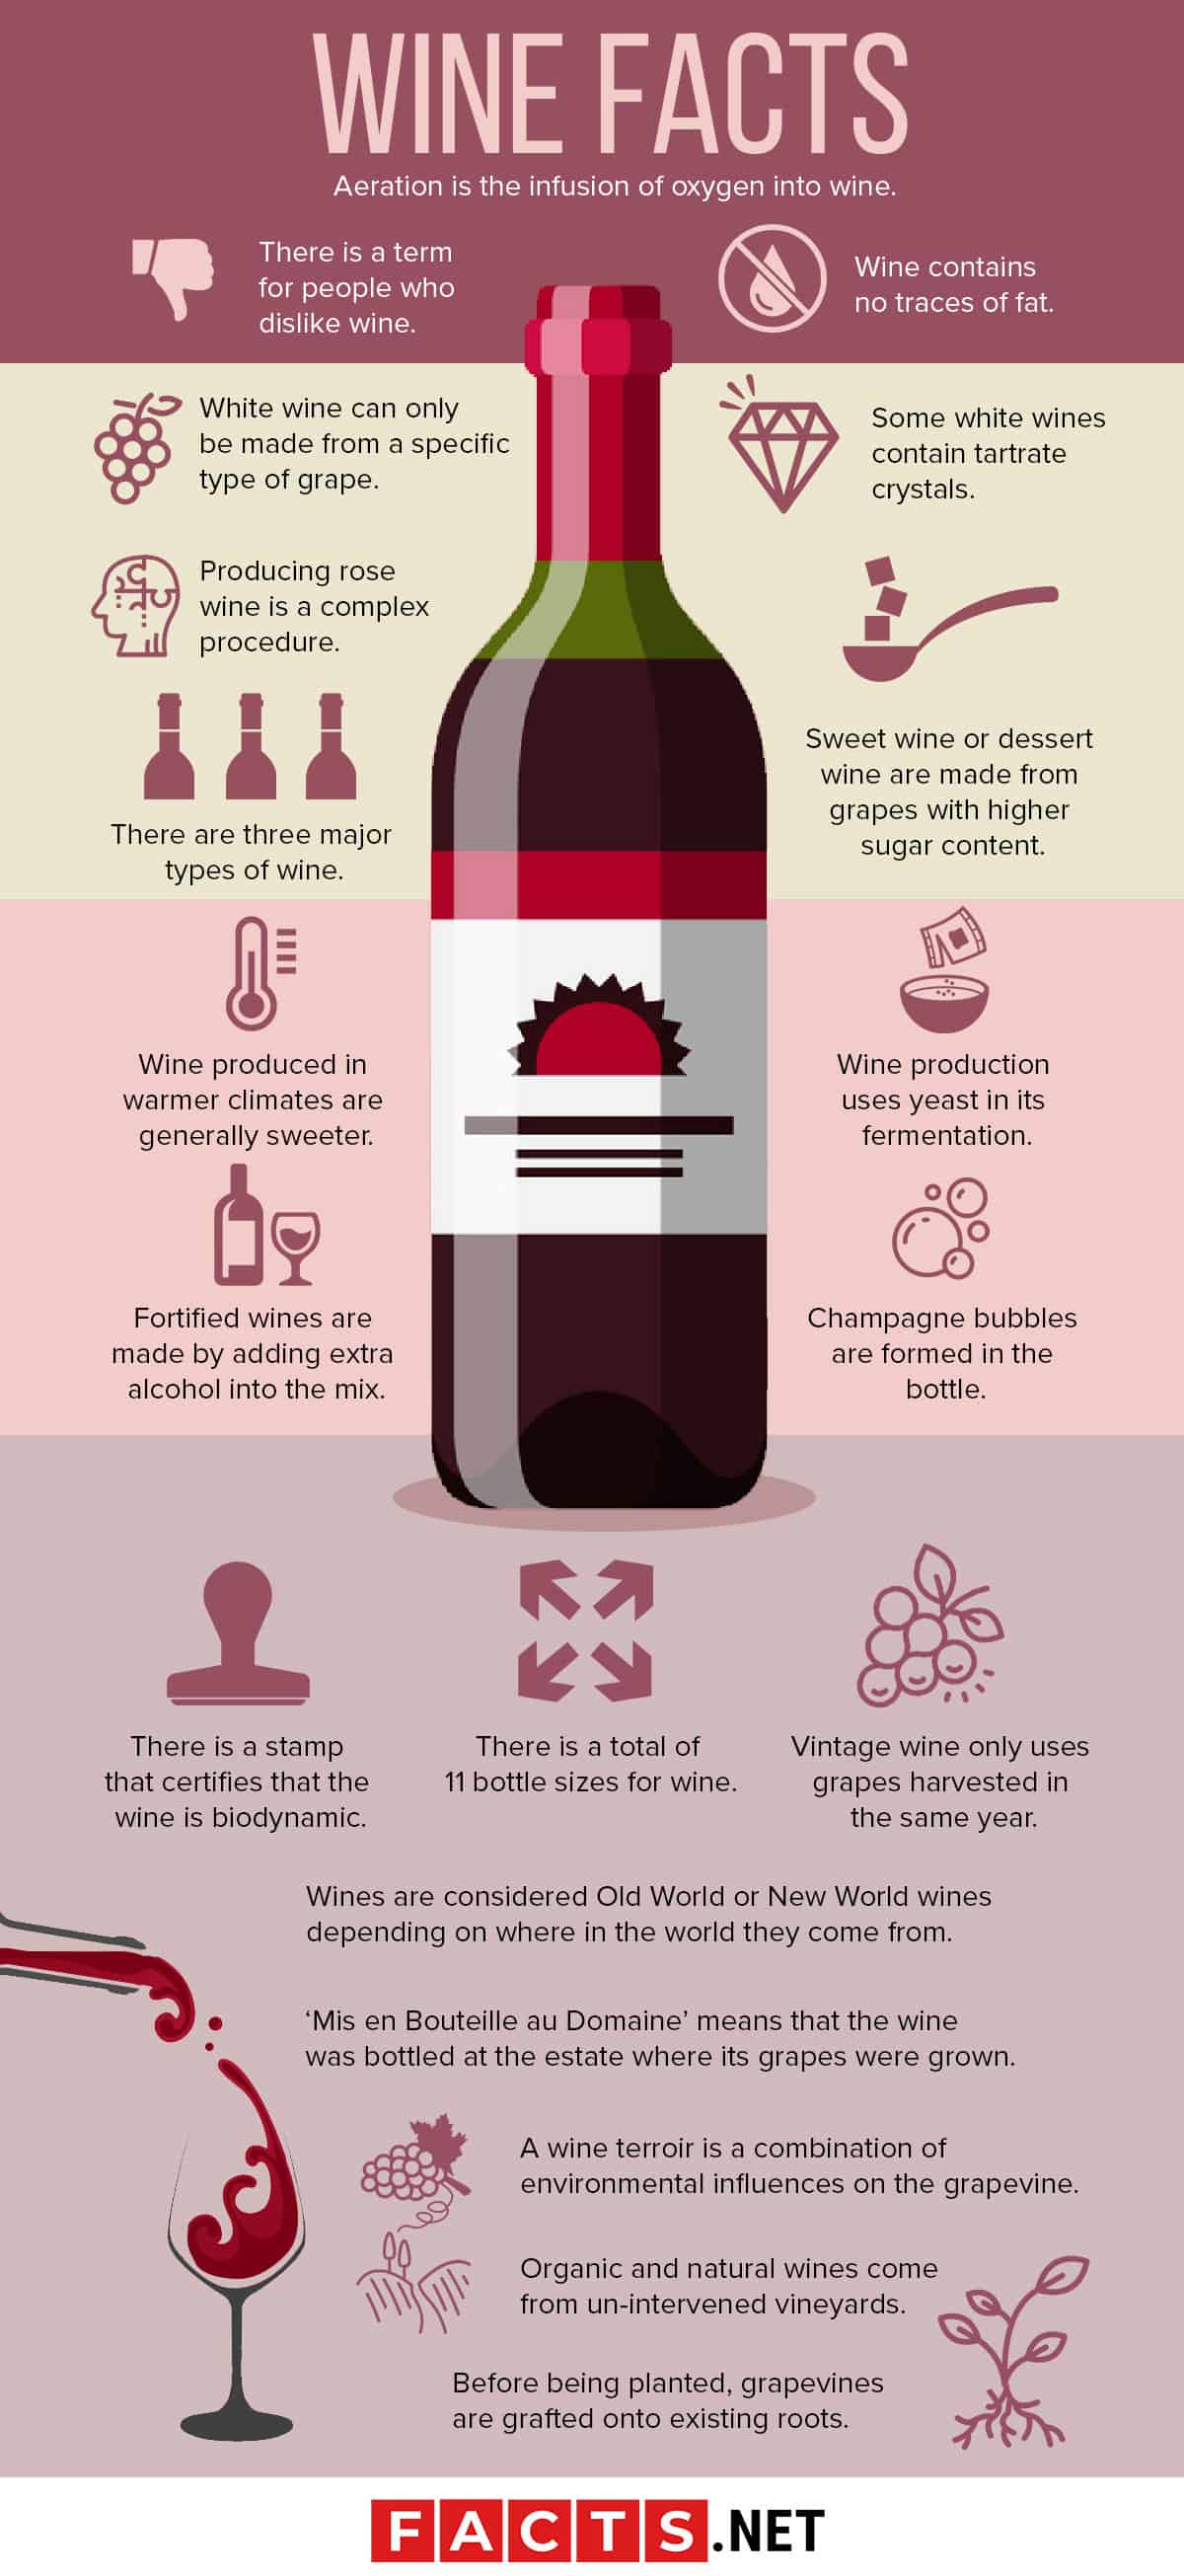 110 Wine Facts Every Wine Connoisseur Won't Share With You | Facts.net